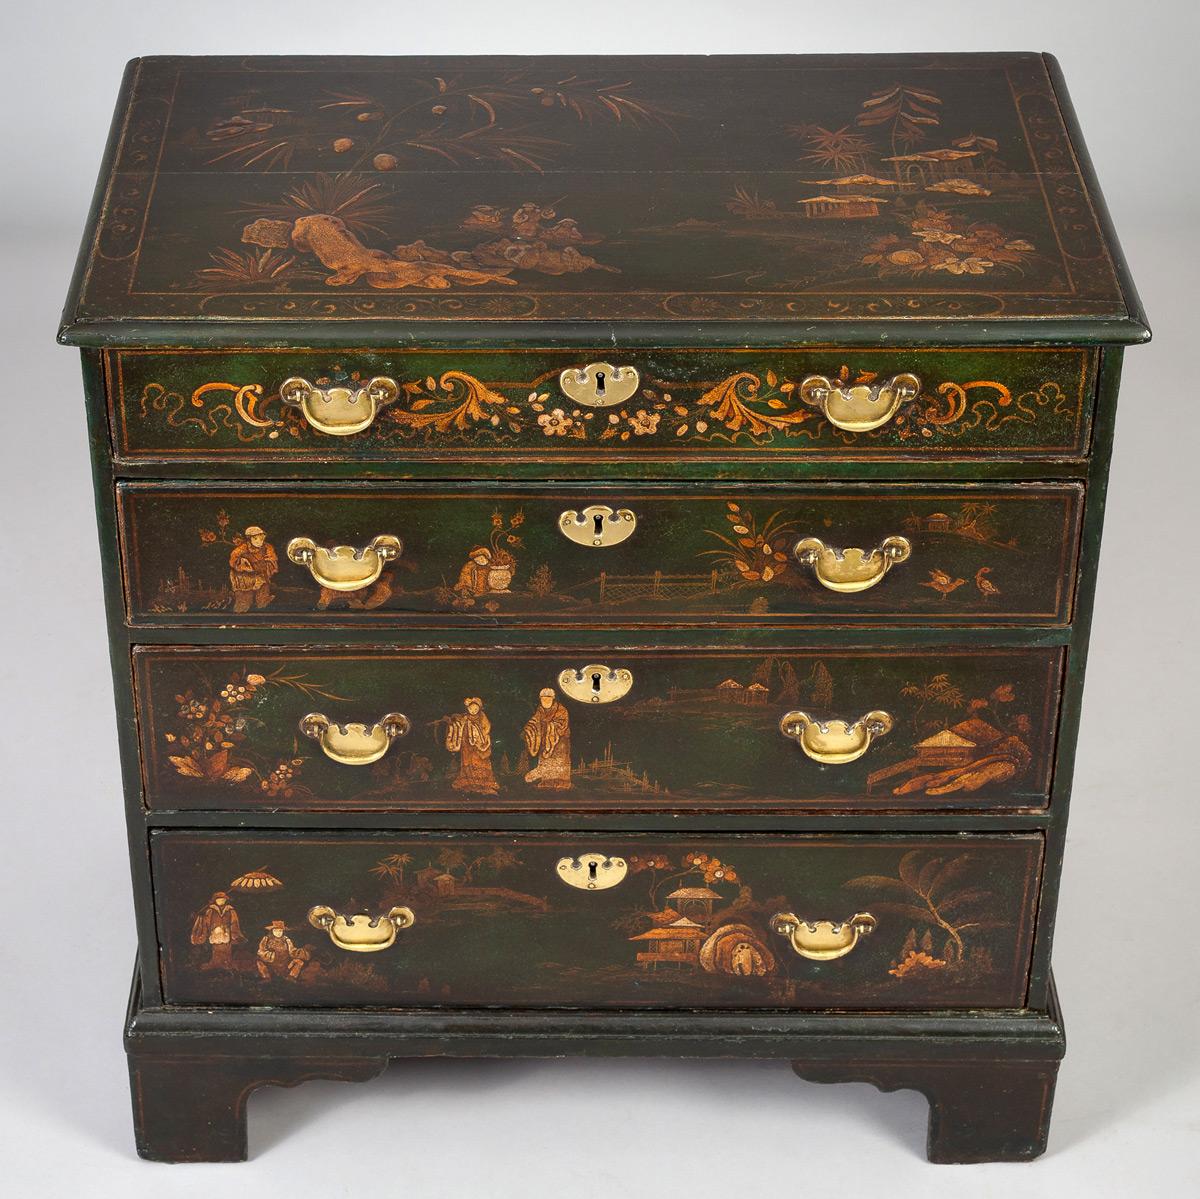 George III small Japanned and gilded chest with four graduated drawers, the top, front and sides decorated with chinoiserie figures, trees, pagodas, rockery and boats on a green background with original brass hardware and escutcheons, raised on